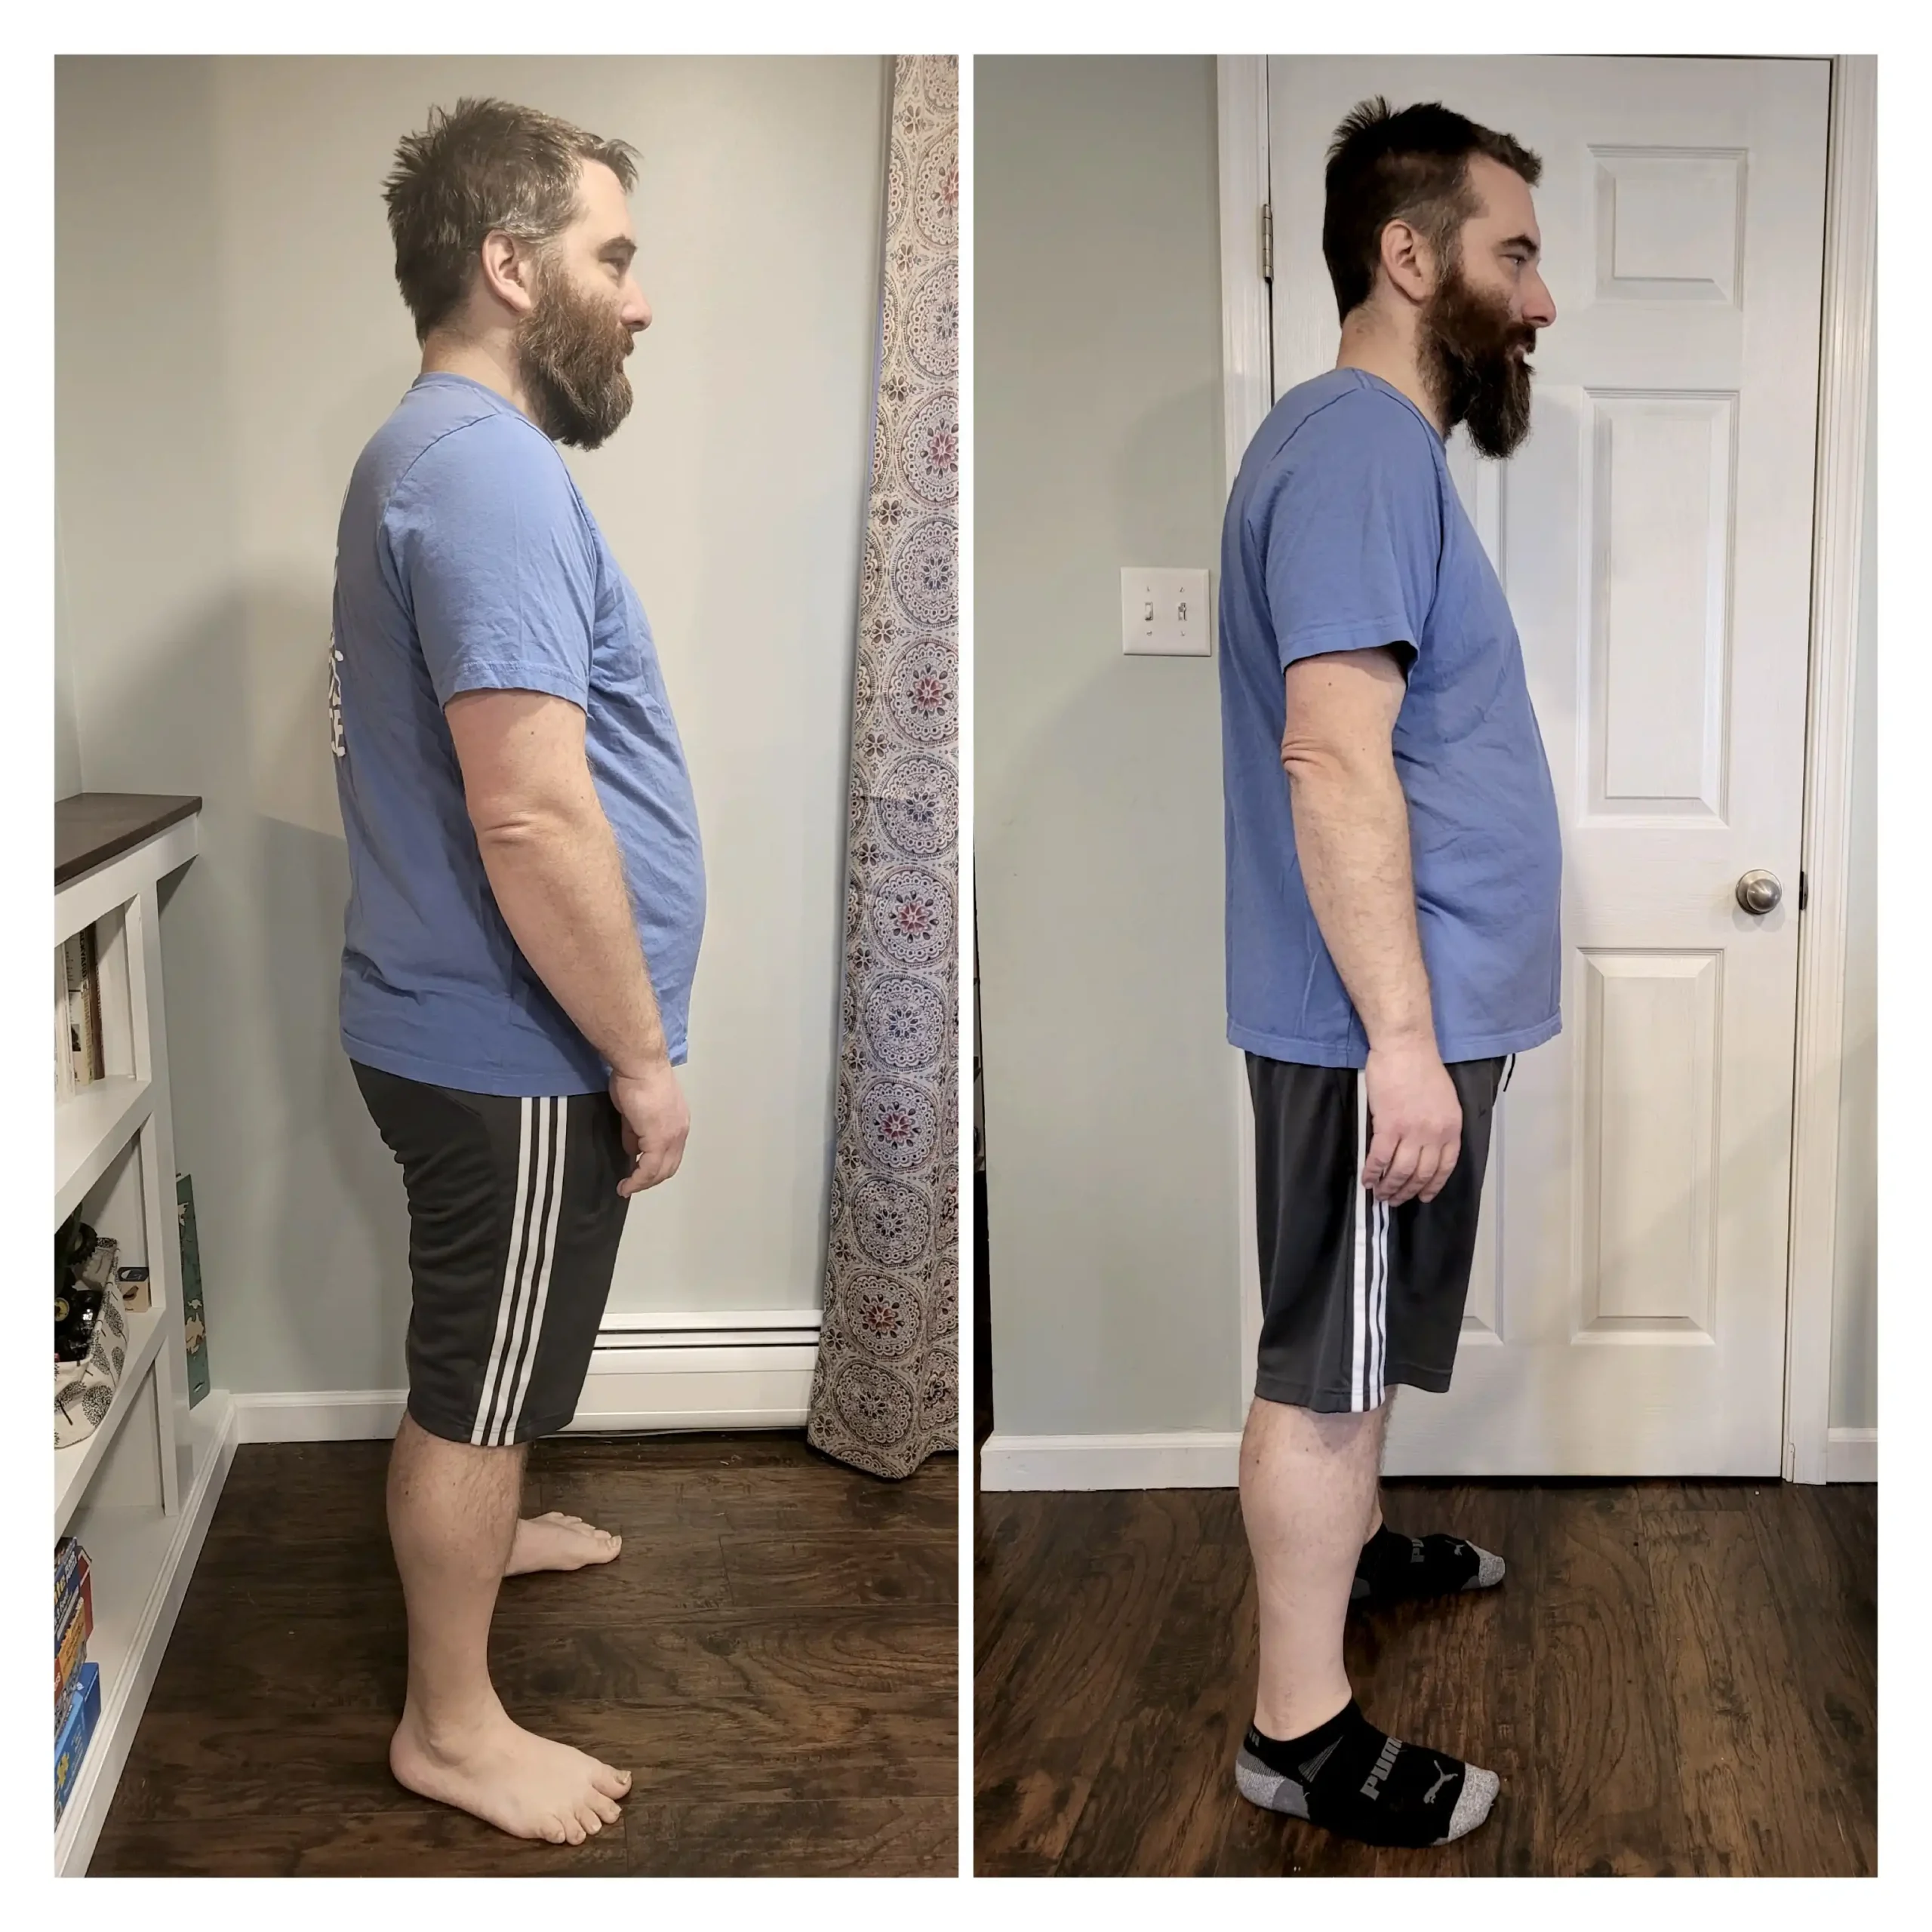 Dan before and after weight loss - side